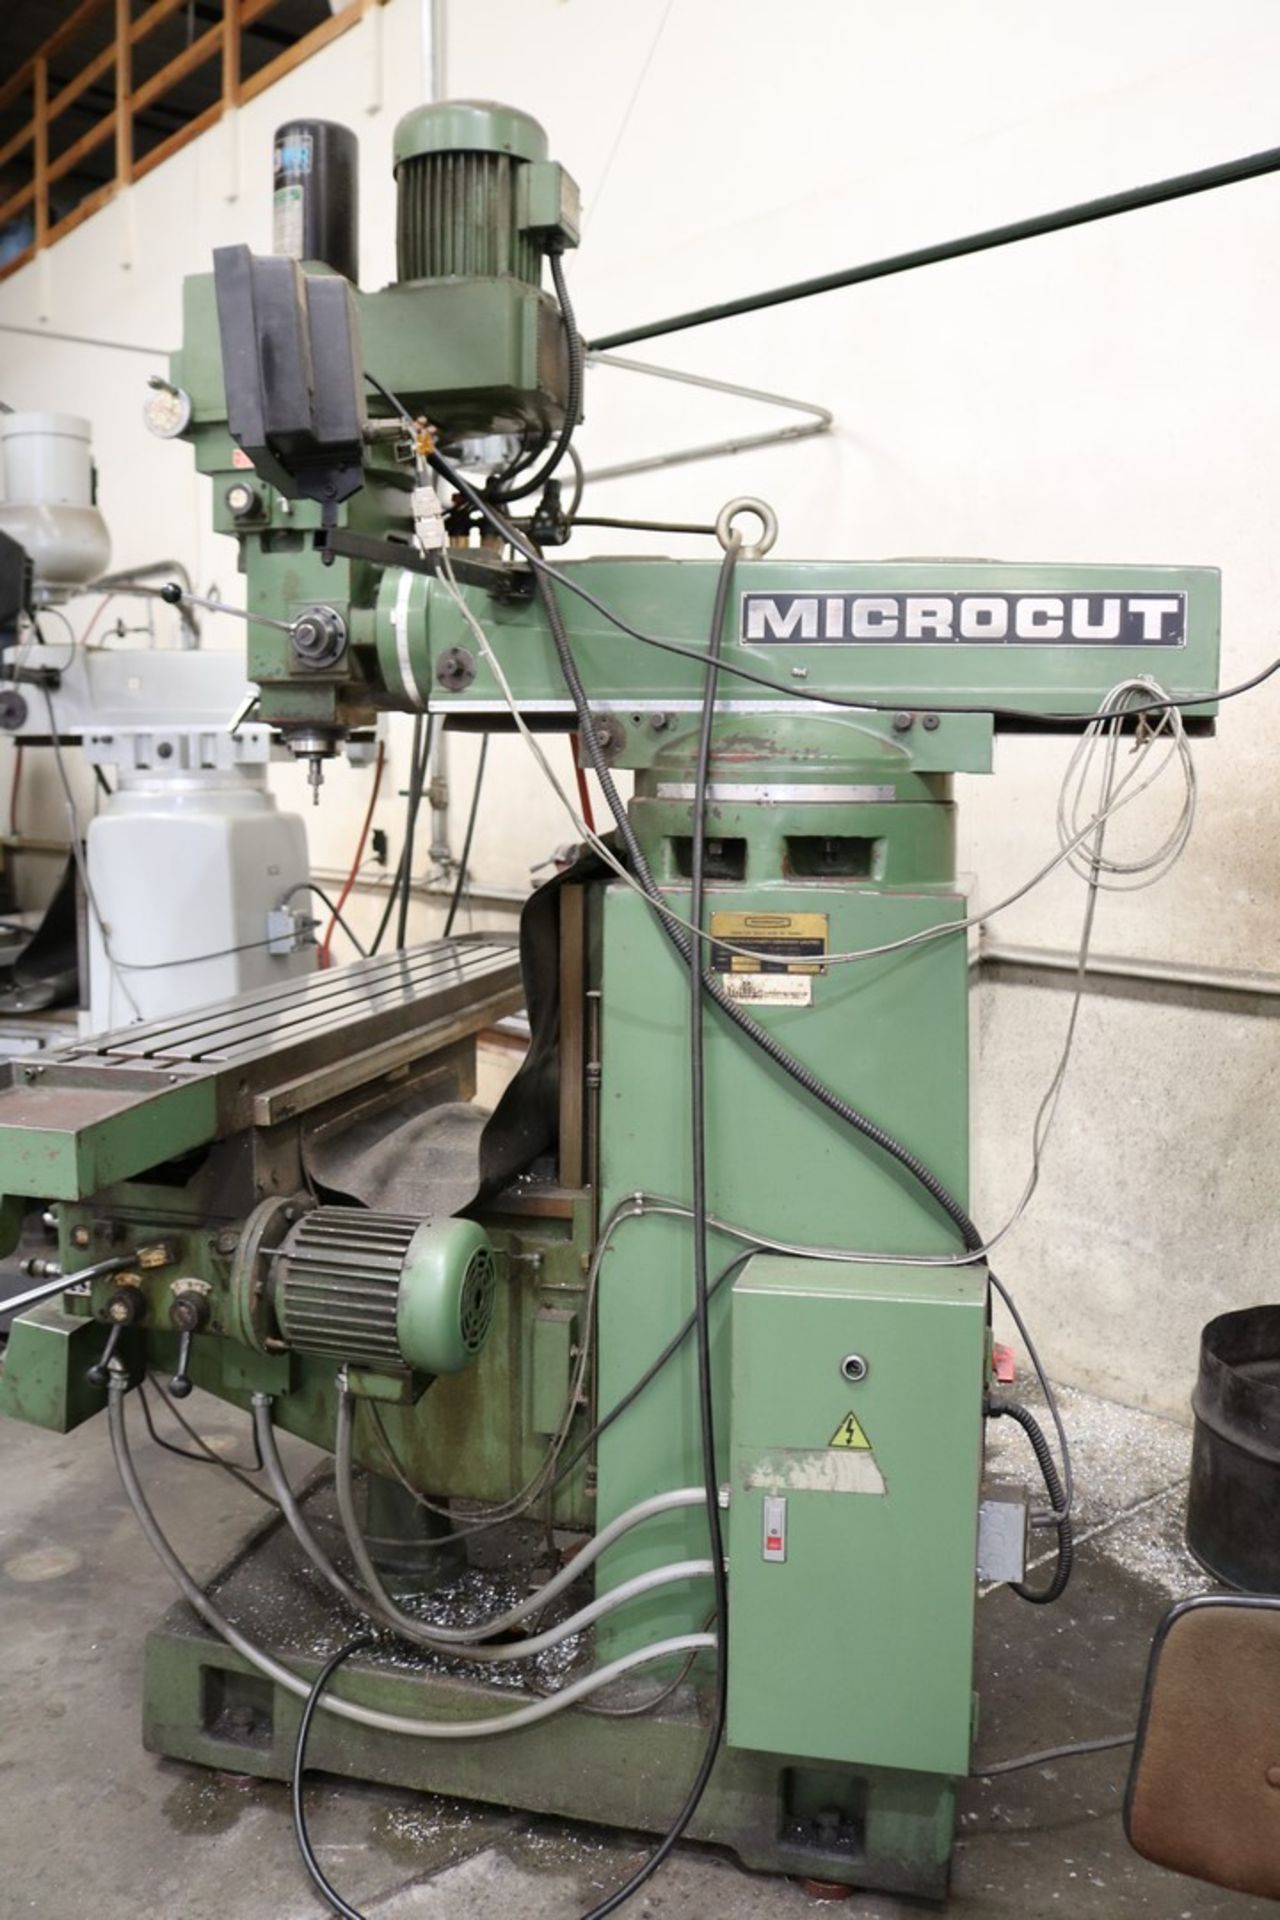 Microcut 5000VS Knee Mill, 5HP, Anilam Wizard 350 Plus DRO, Servo Y Axis, Auto Up and Down, - Image 8 of 11